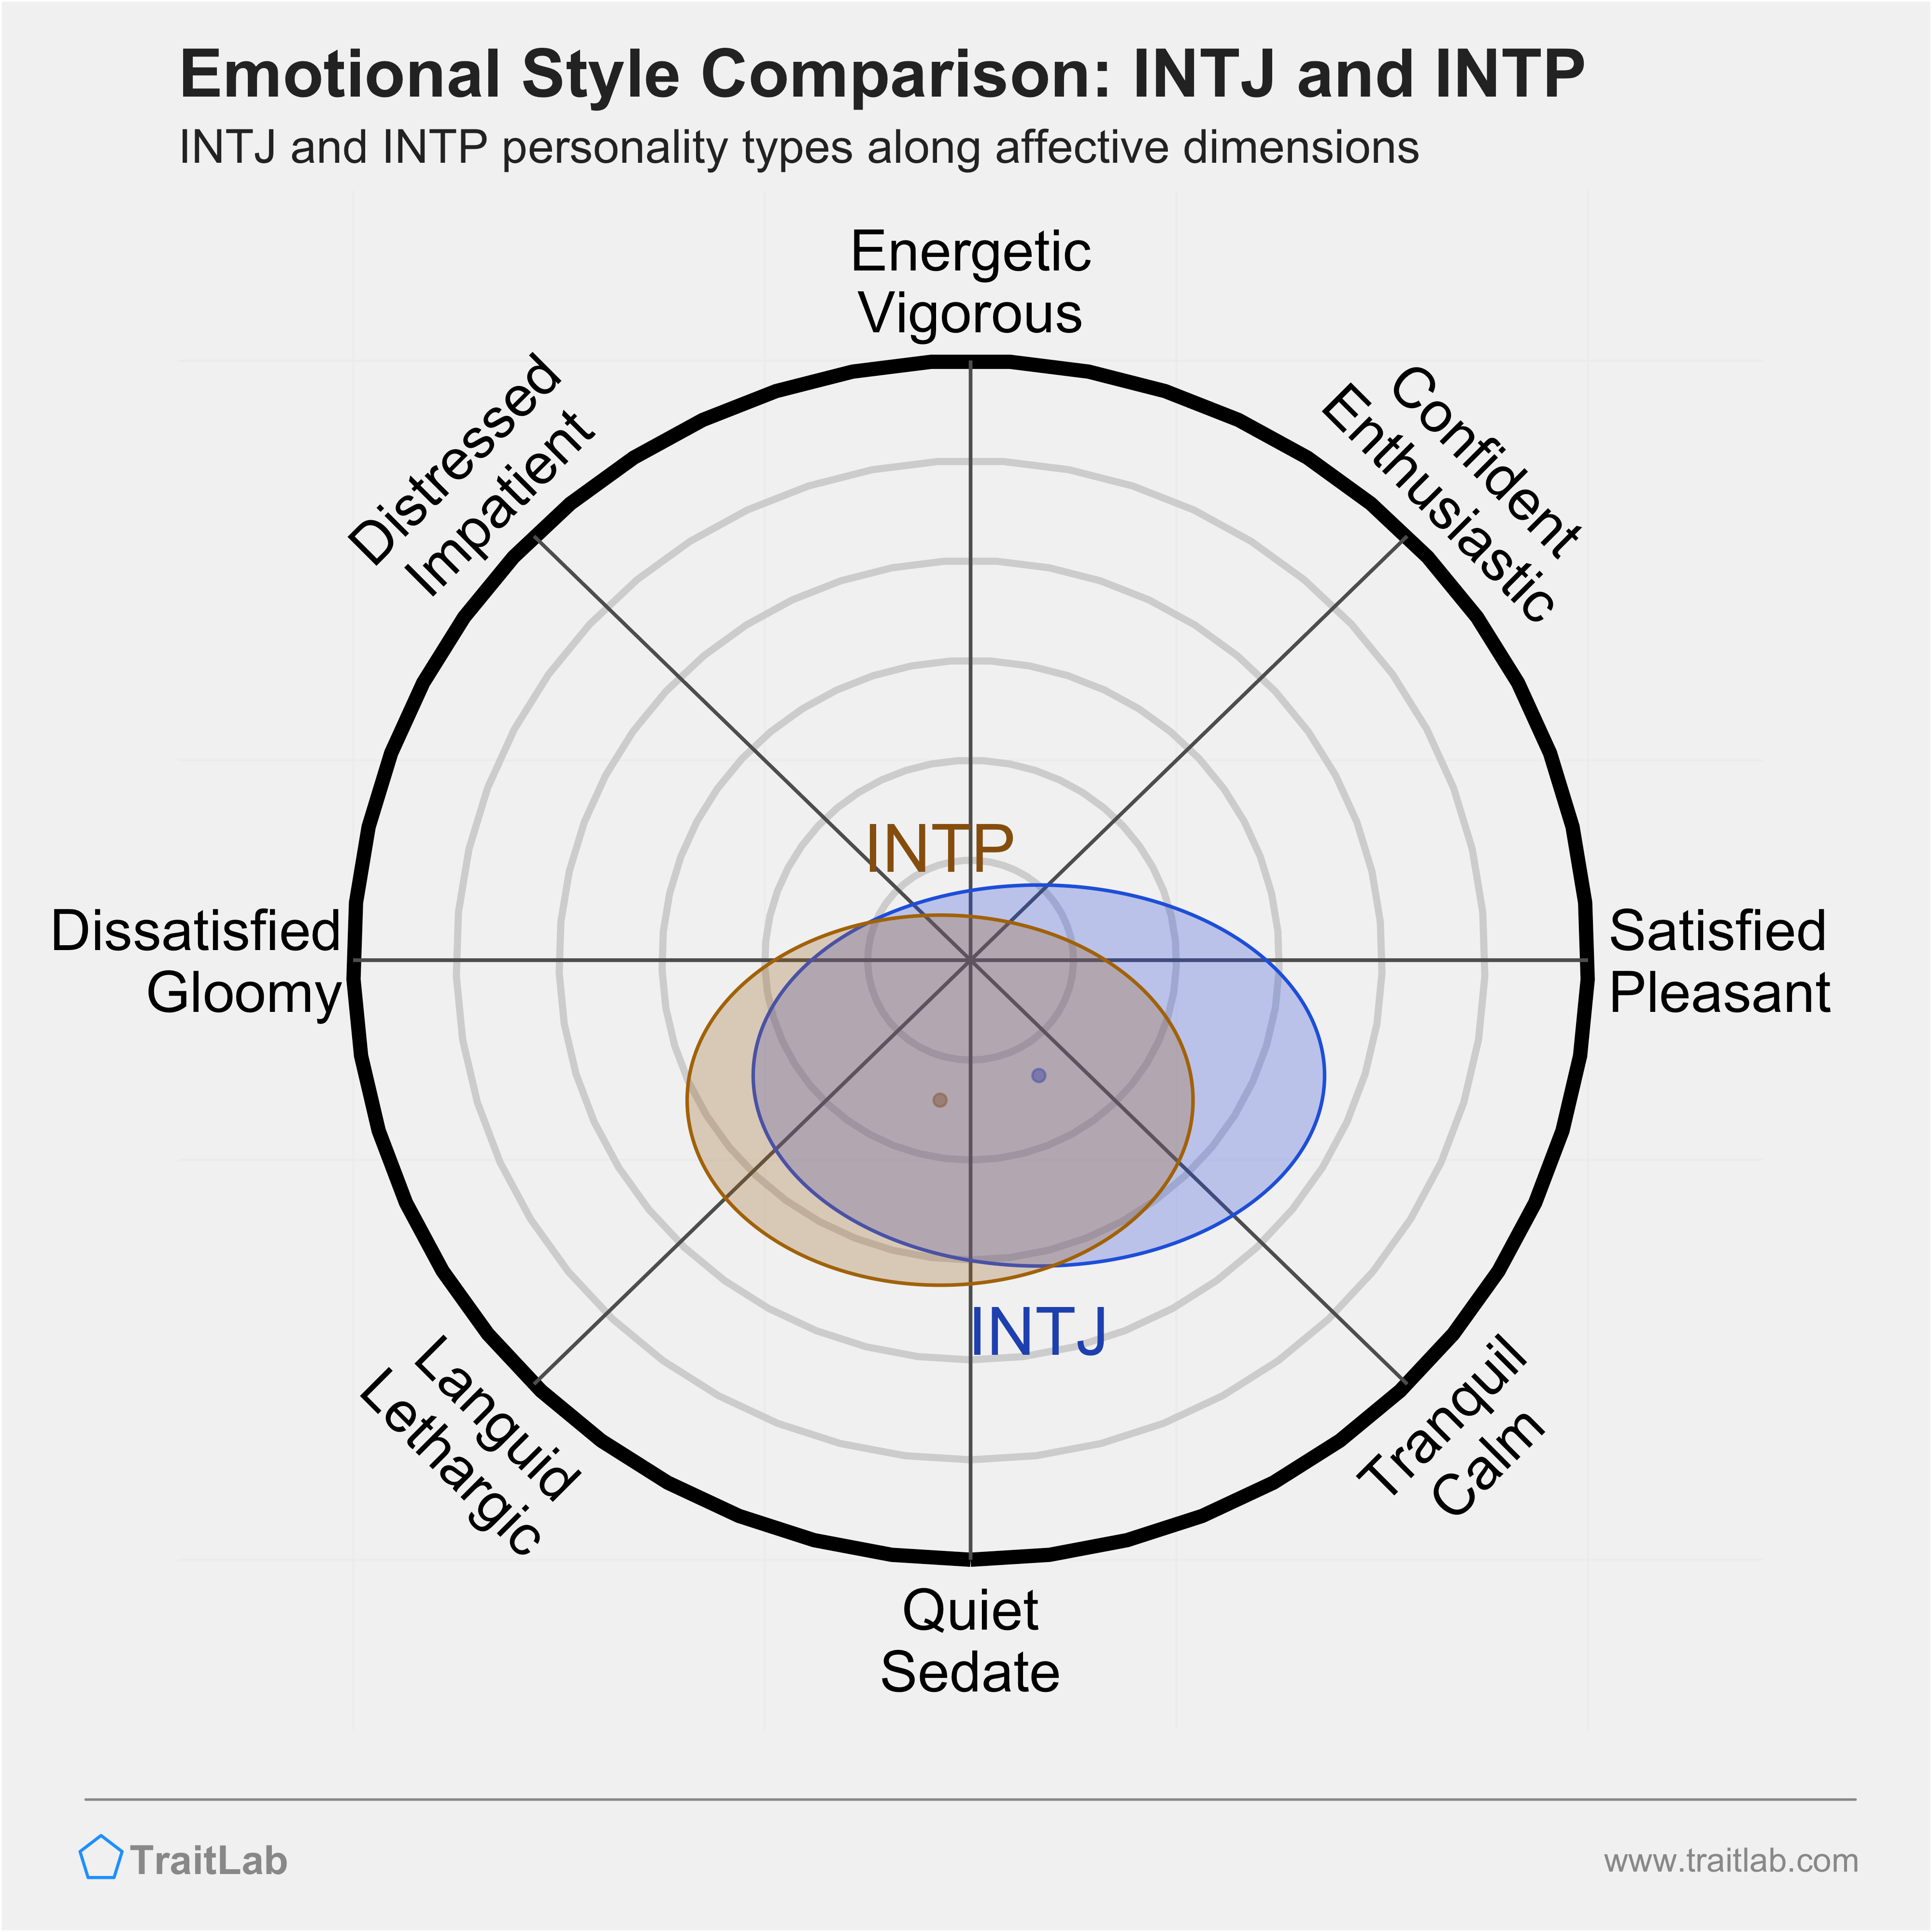 TIO (The Insolence Overseer) MBTI Personality Type: INTJ or INTP?